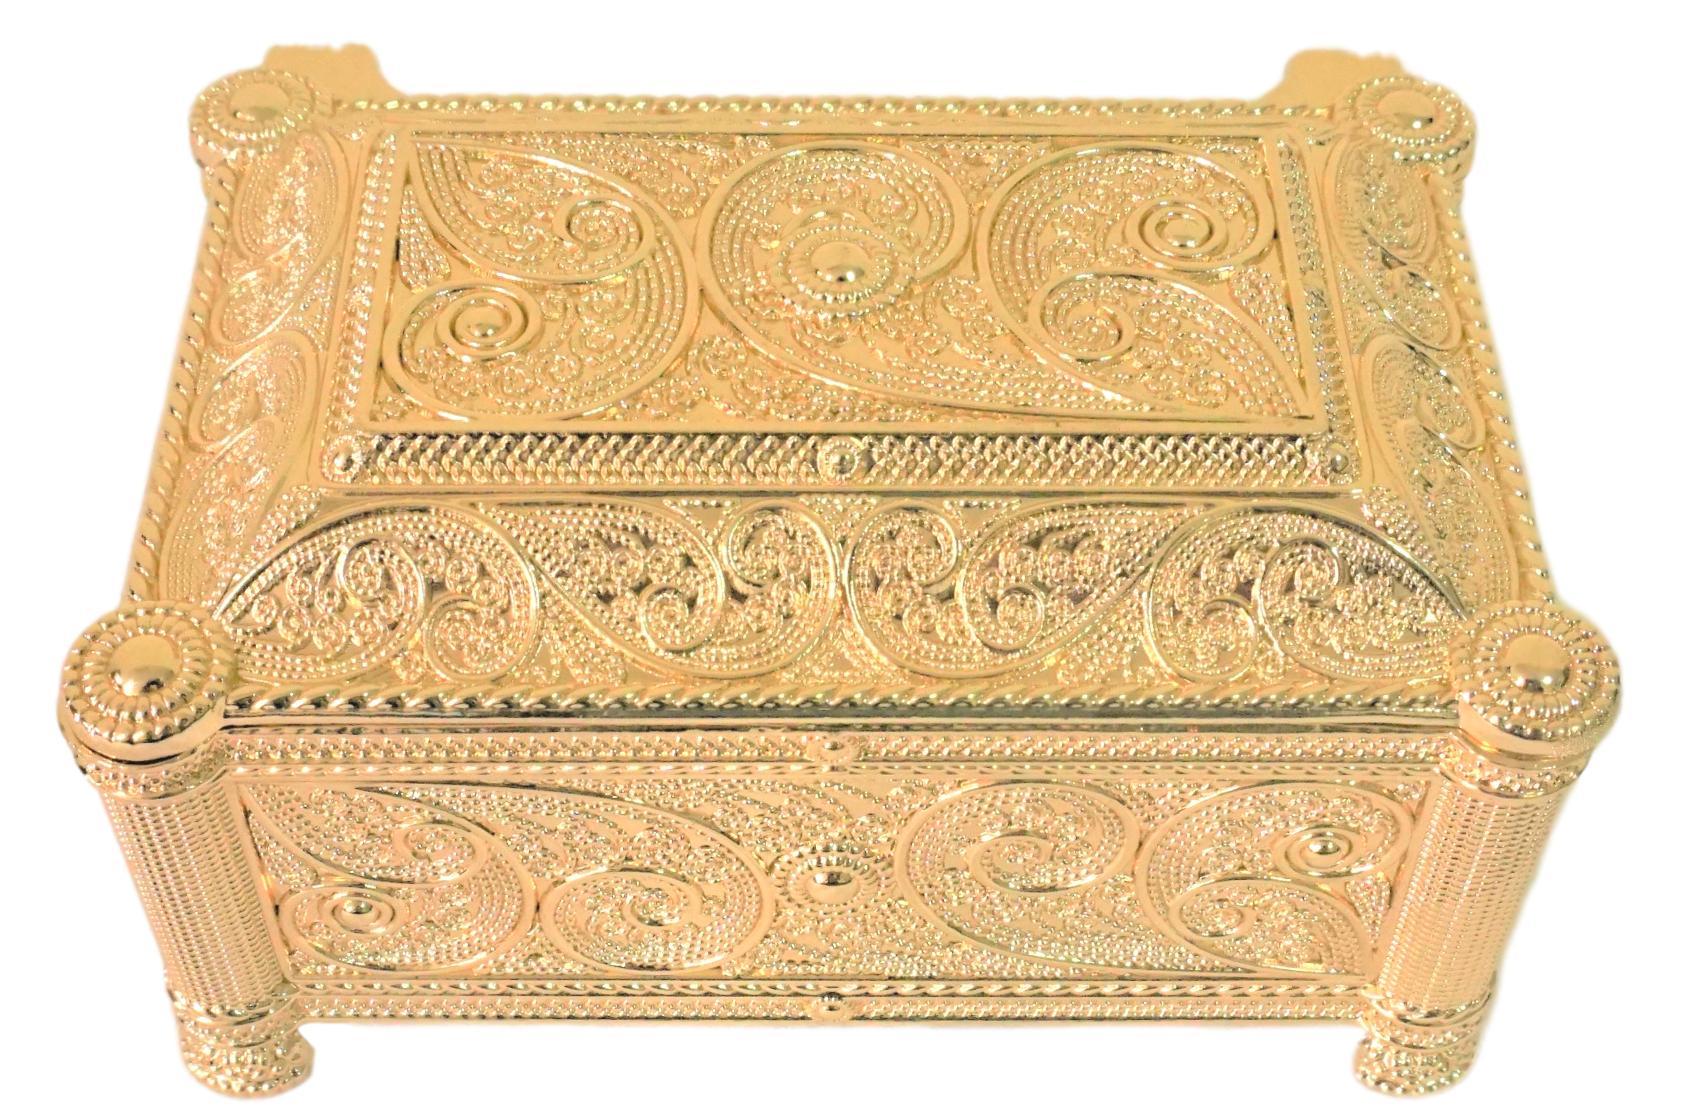 SFP-88153MG : 24K Gold Plated Designer Jewelry Box - Rectangle